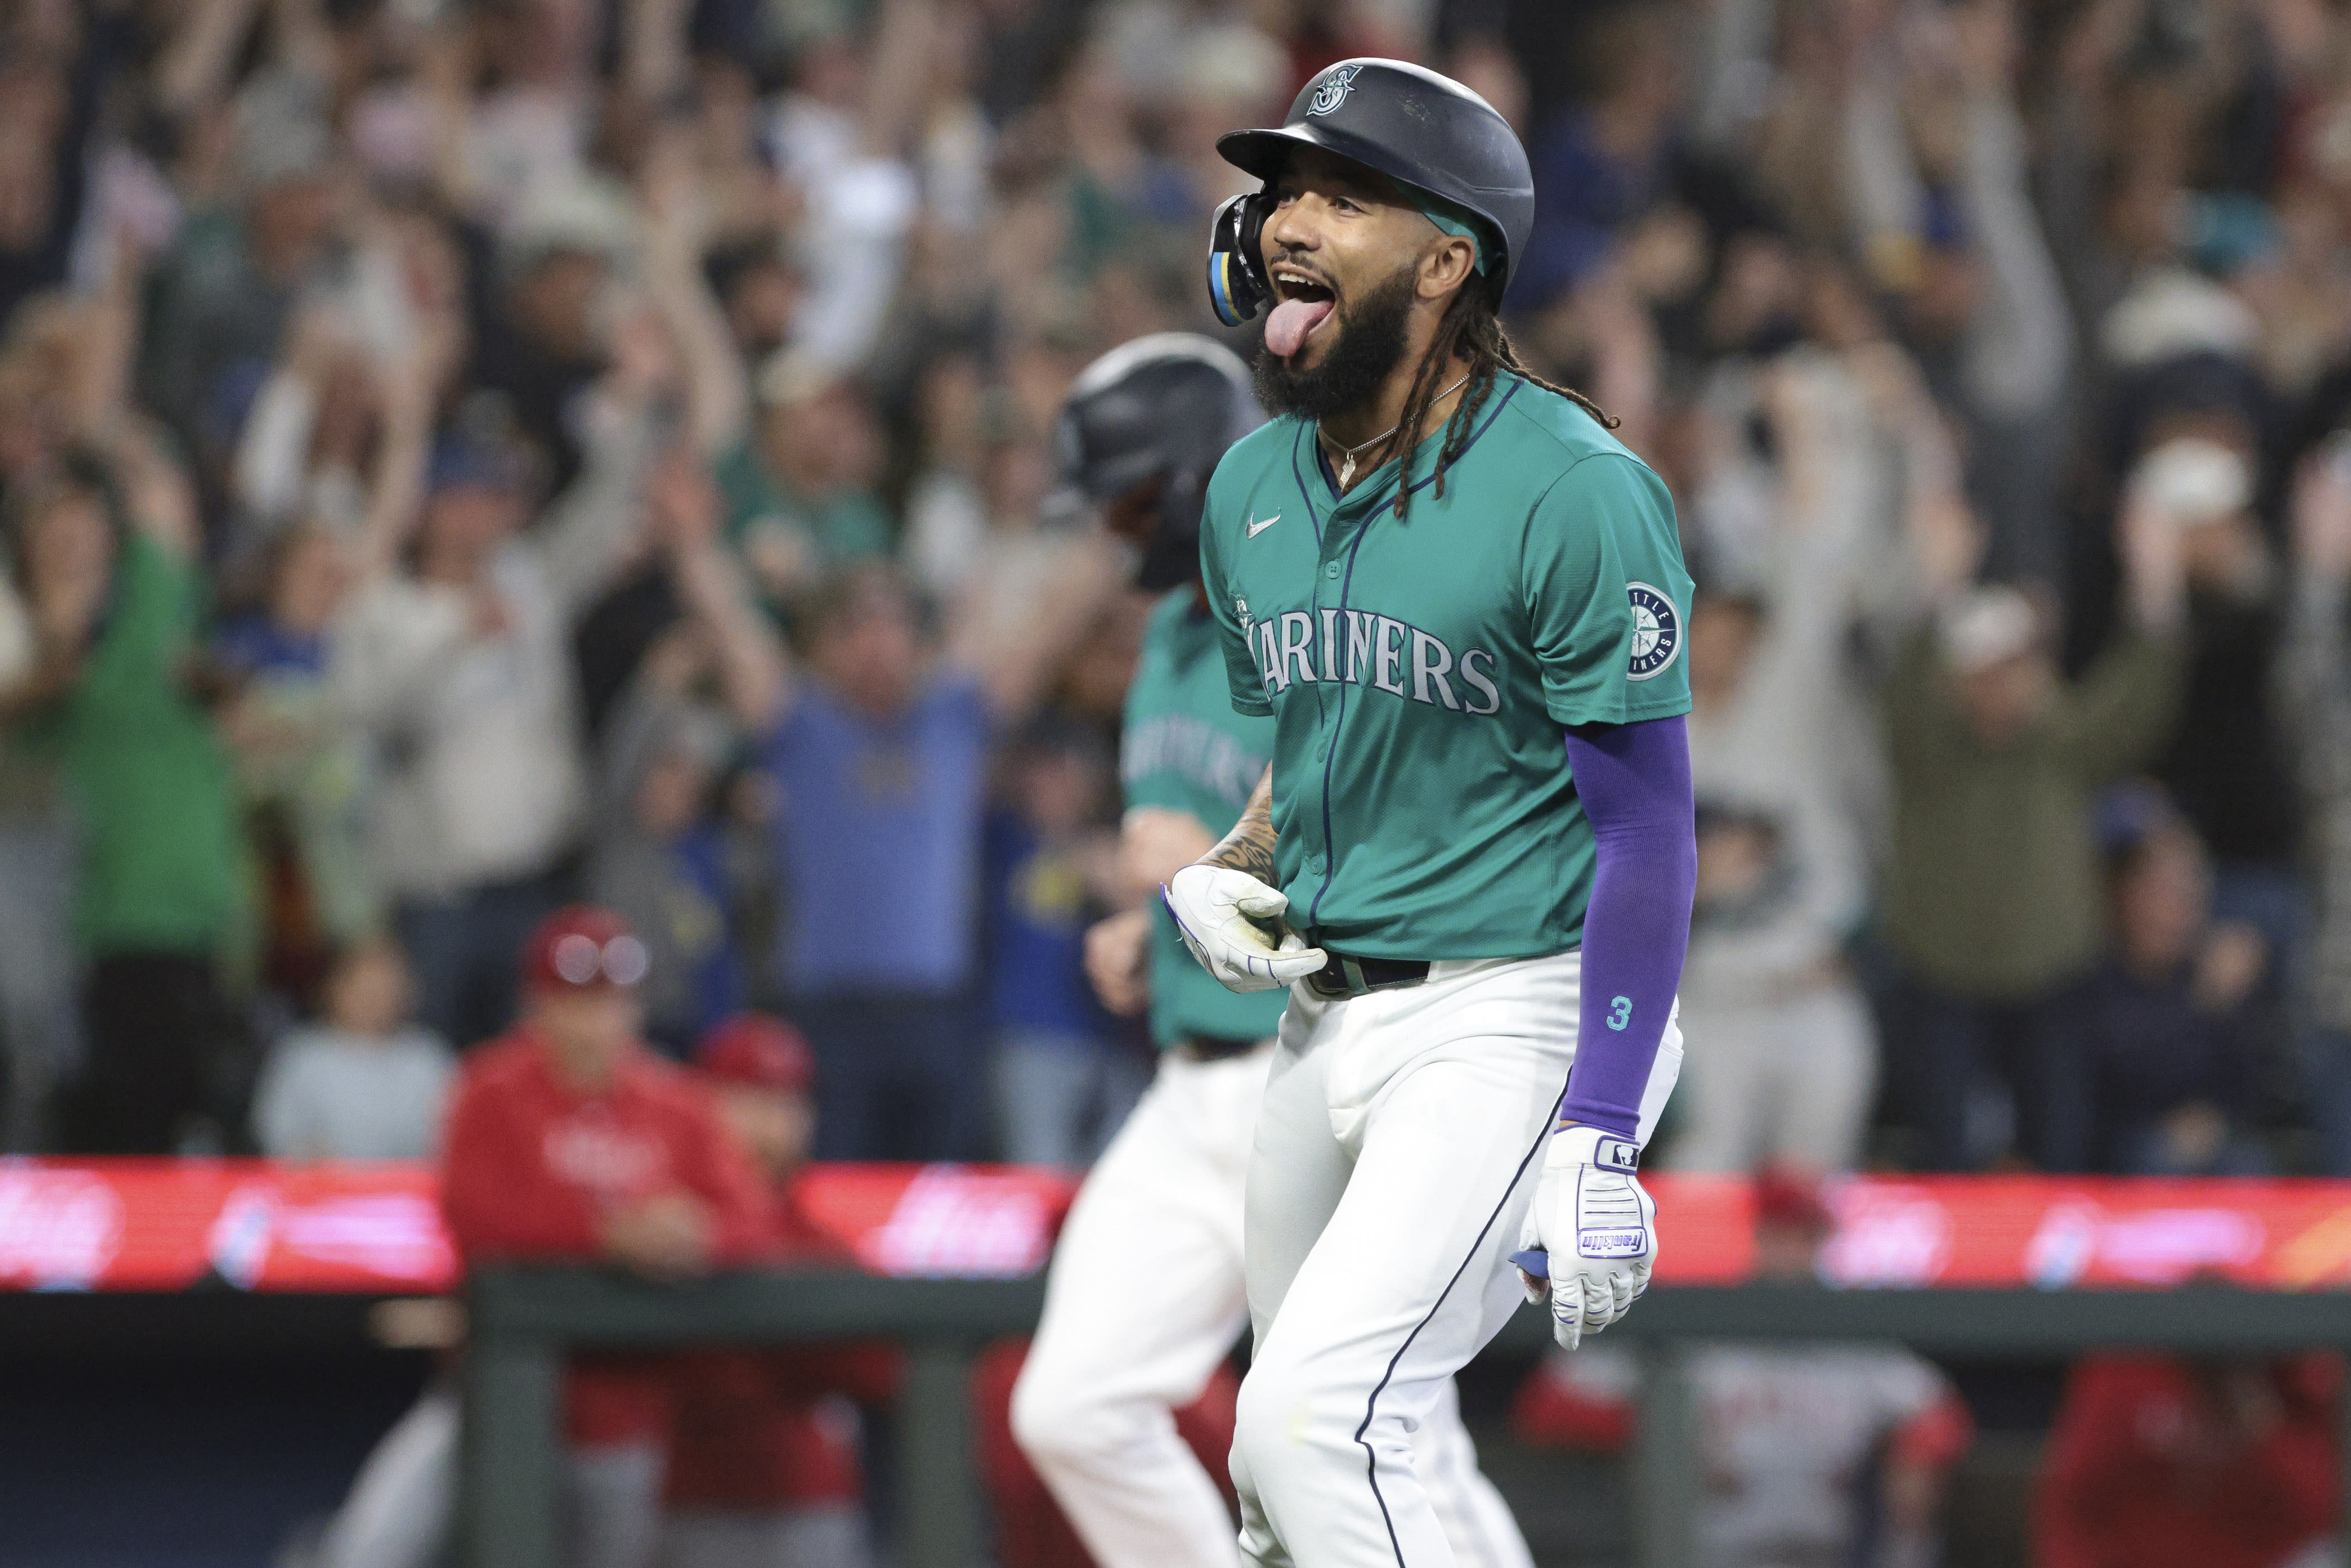 Crawford's slam and Miller's arm lead surging Mariners to 9-0 win over Angels